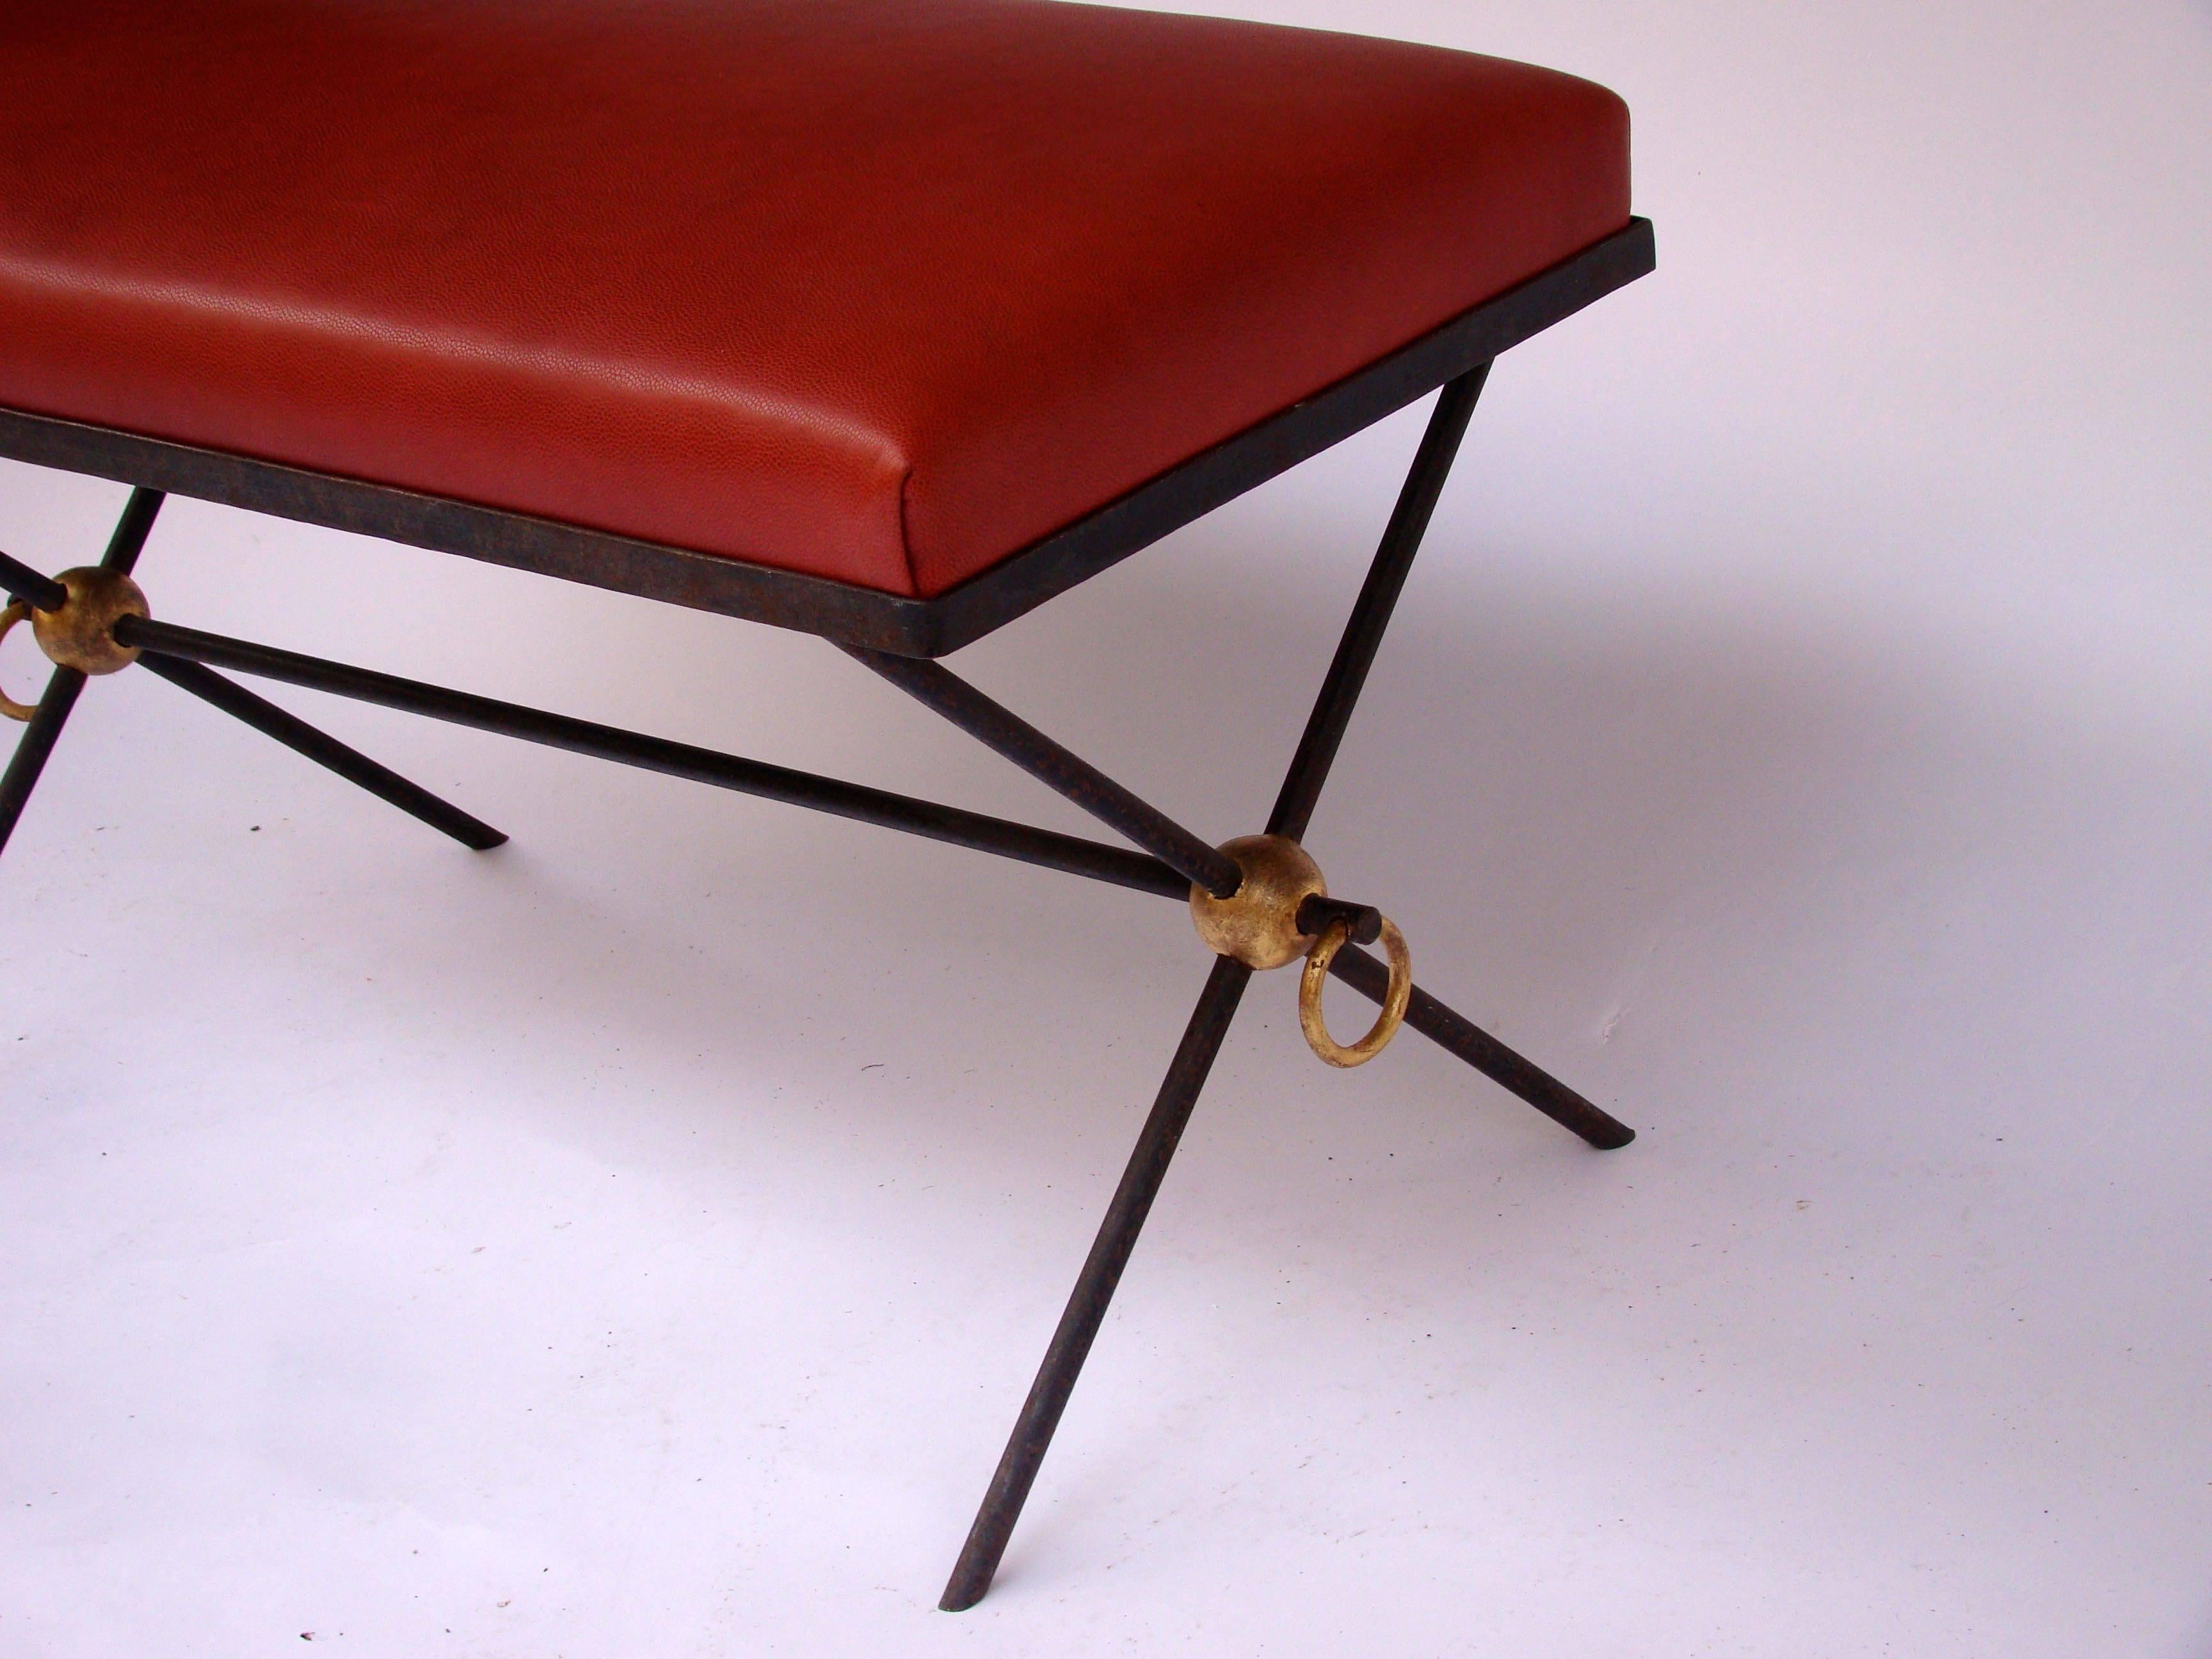 Mid-20th Century French Black and Golden Lacquered Wrought Iron and Leather Bench Seat, 1940s